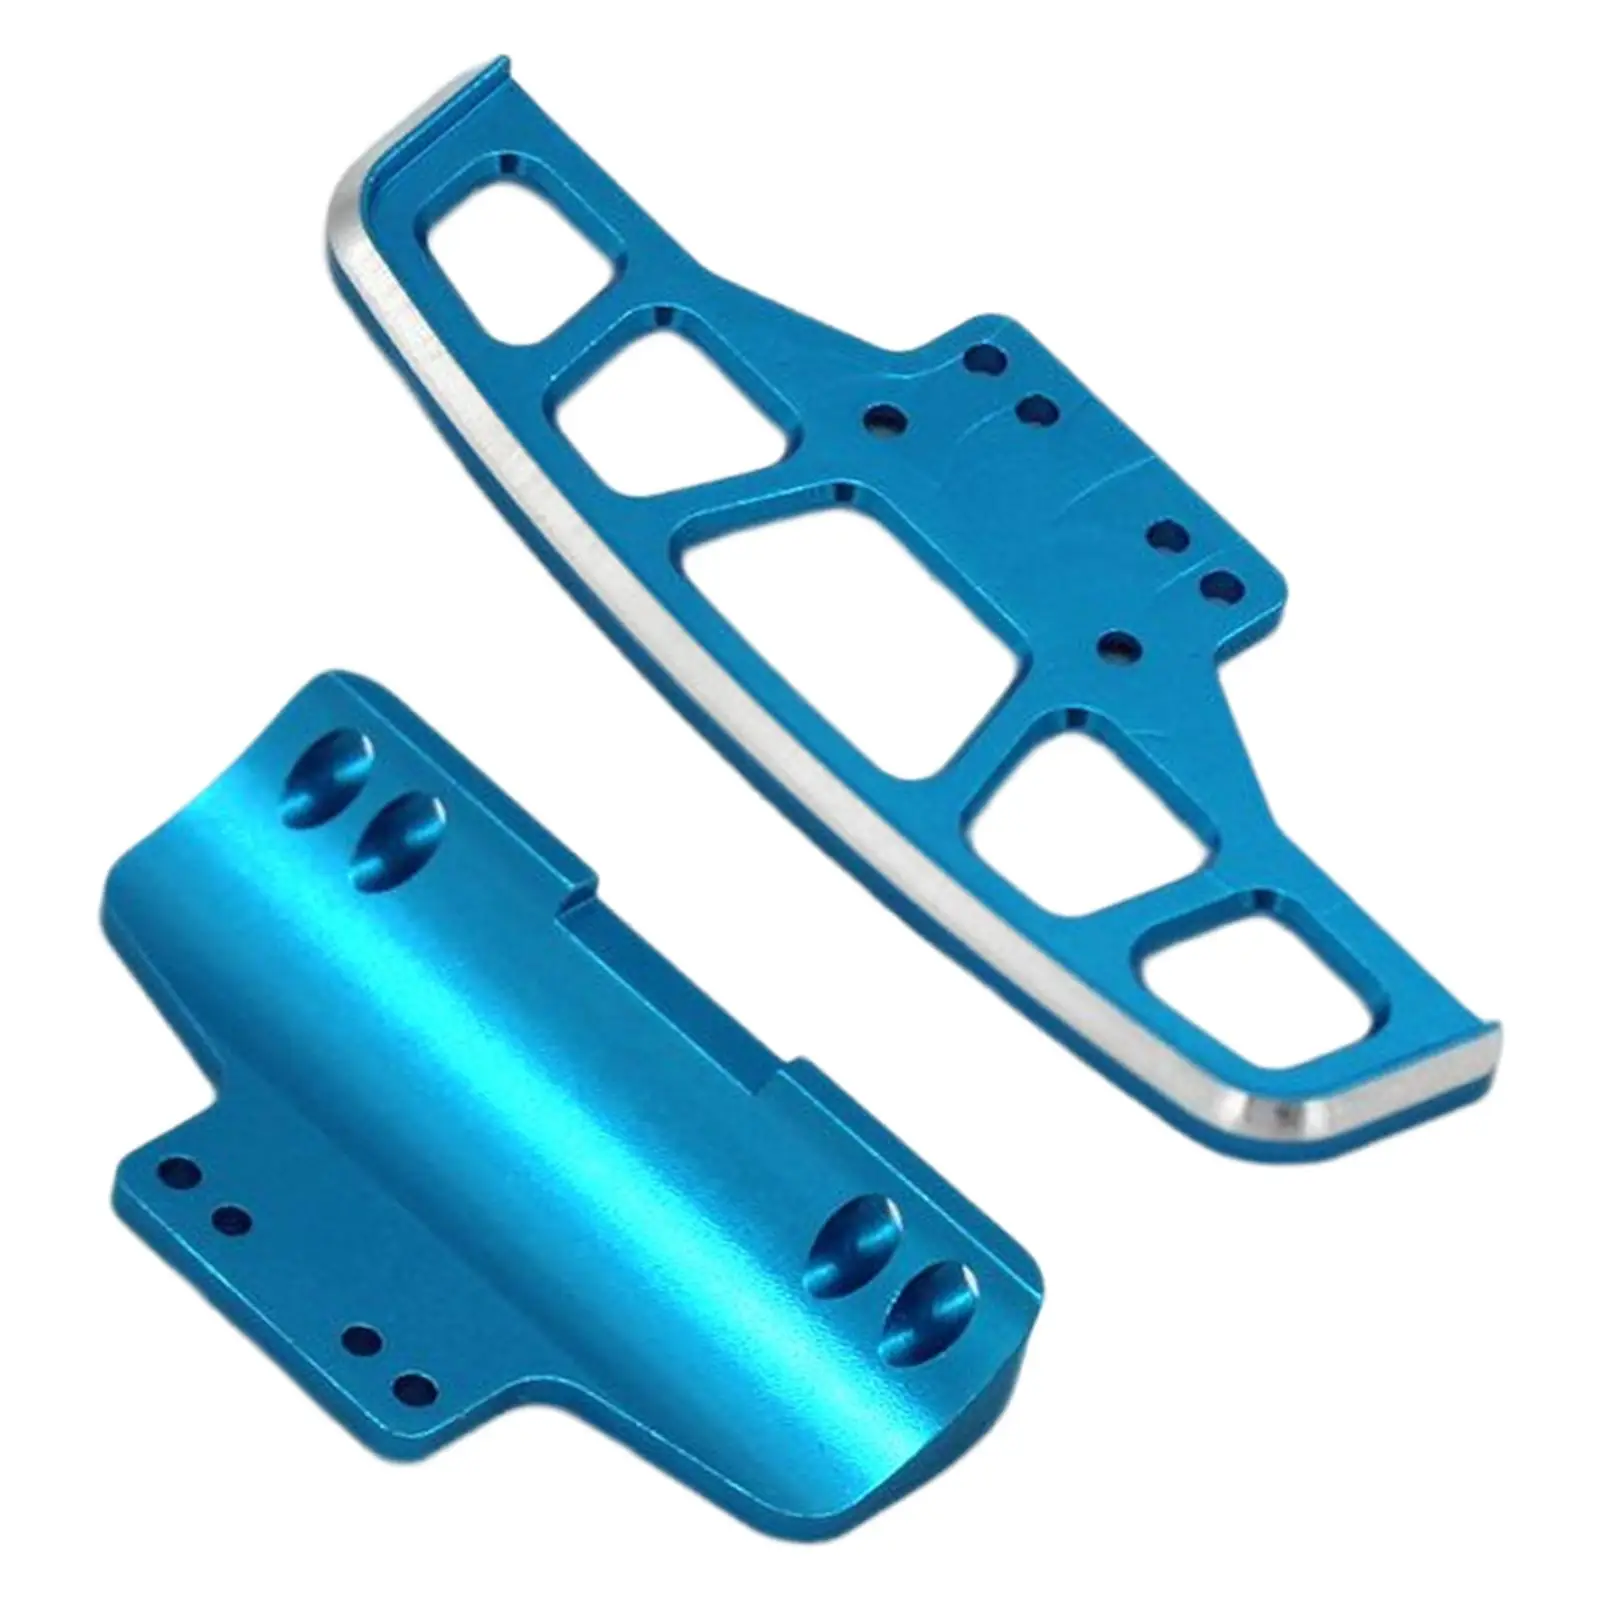 Aluminum Alloy Front and Rear Bumpers Spare Parts for Wltoys 284131 DIY